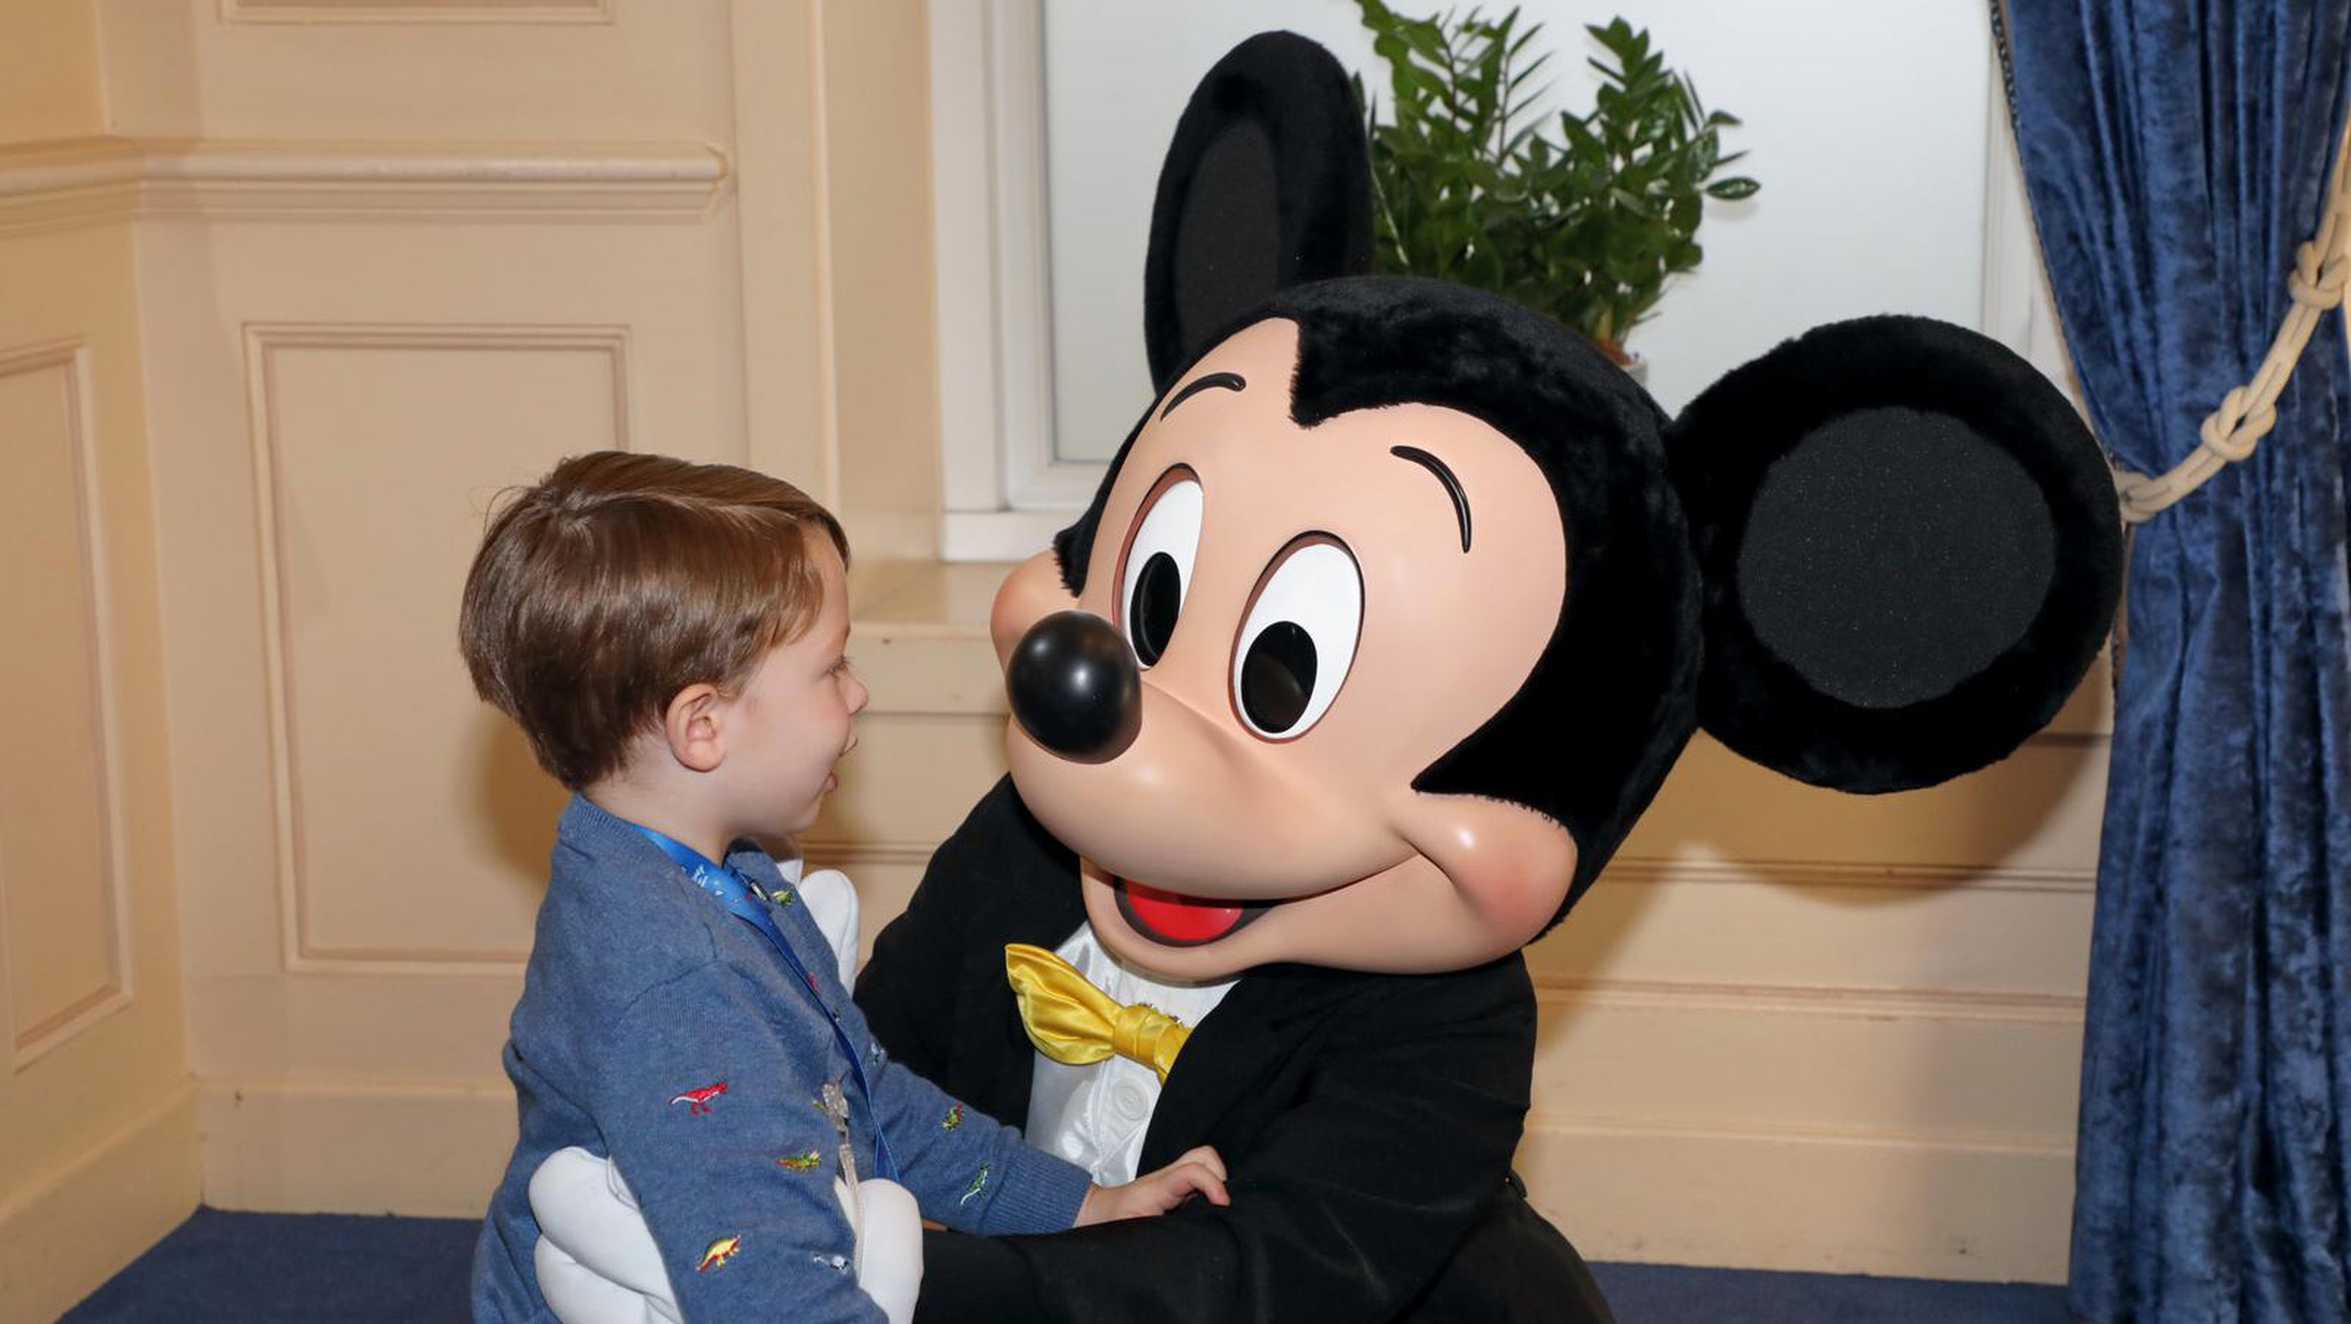 A smiling Archie meeting Mickey Mouse.